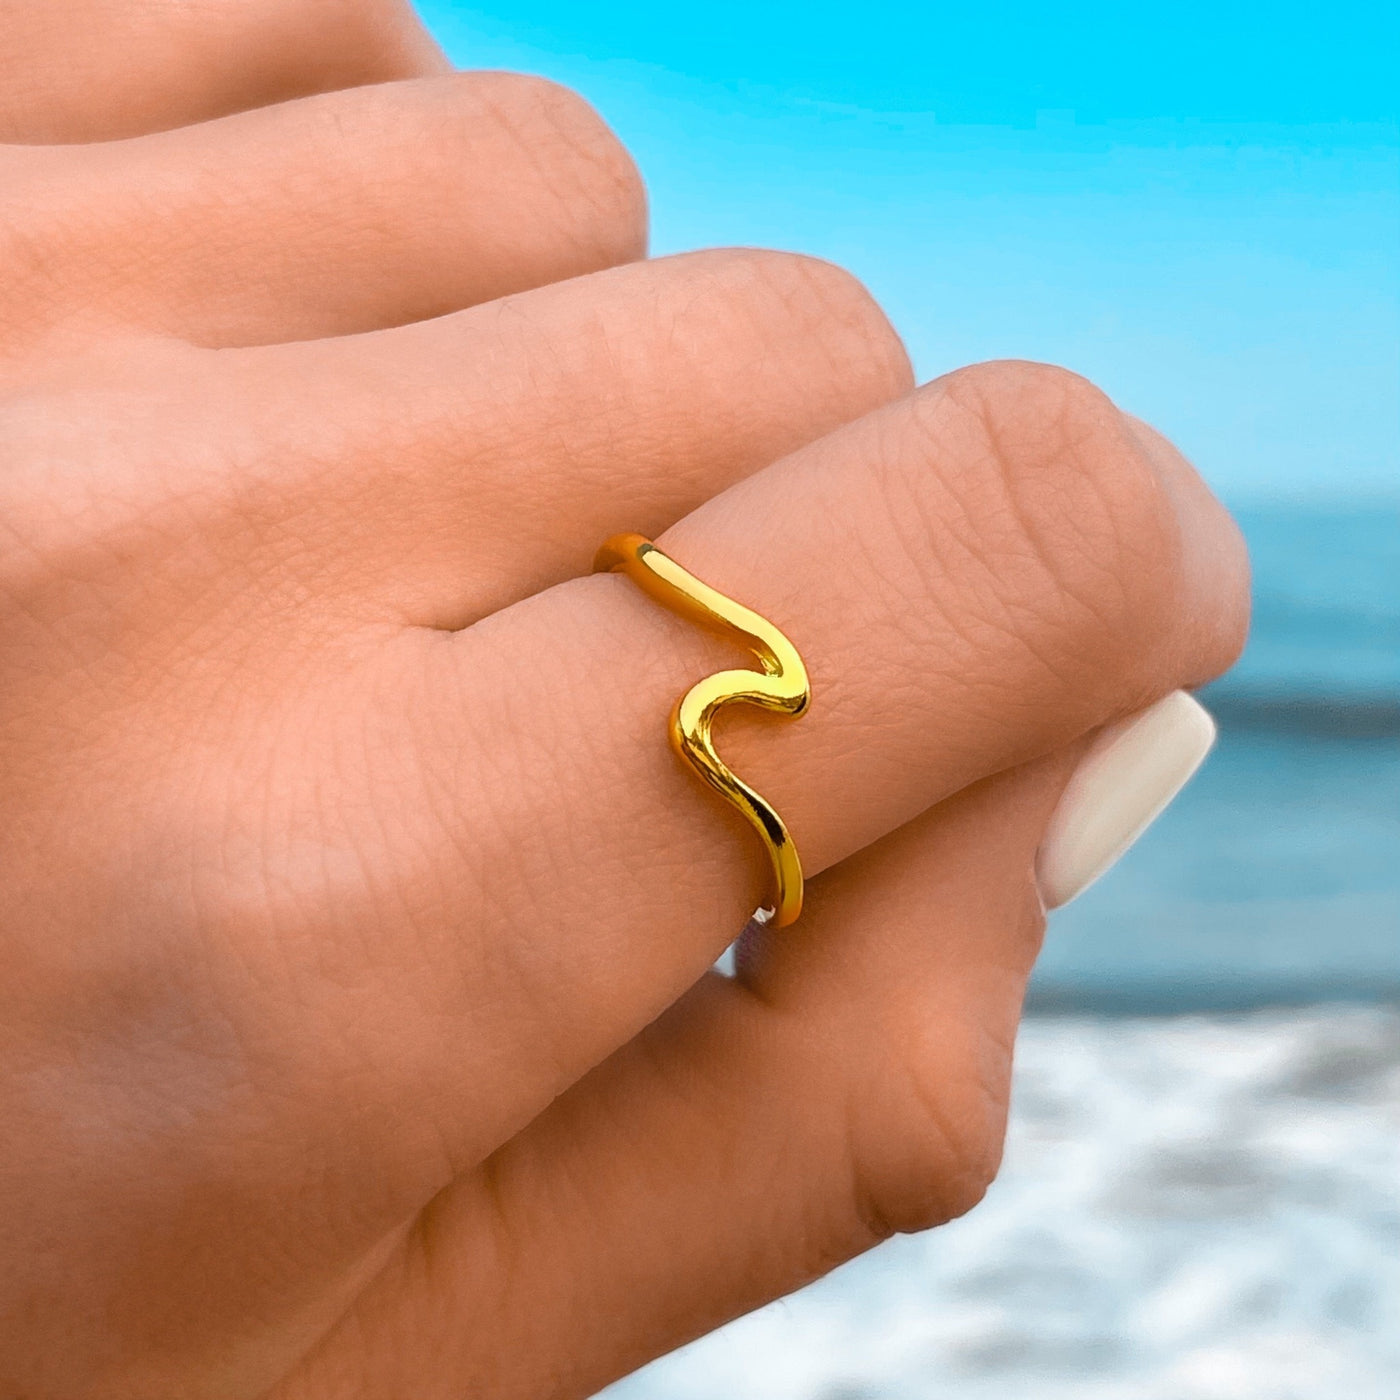 Gold Wave Ring